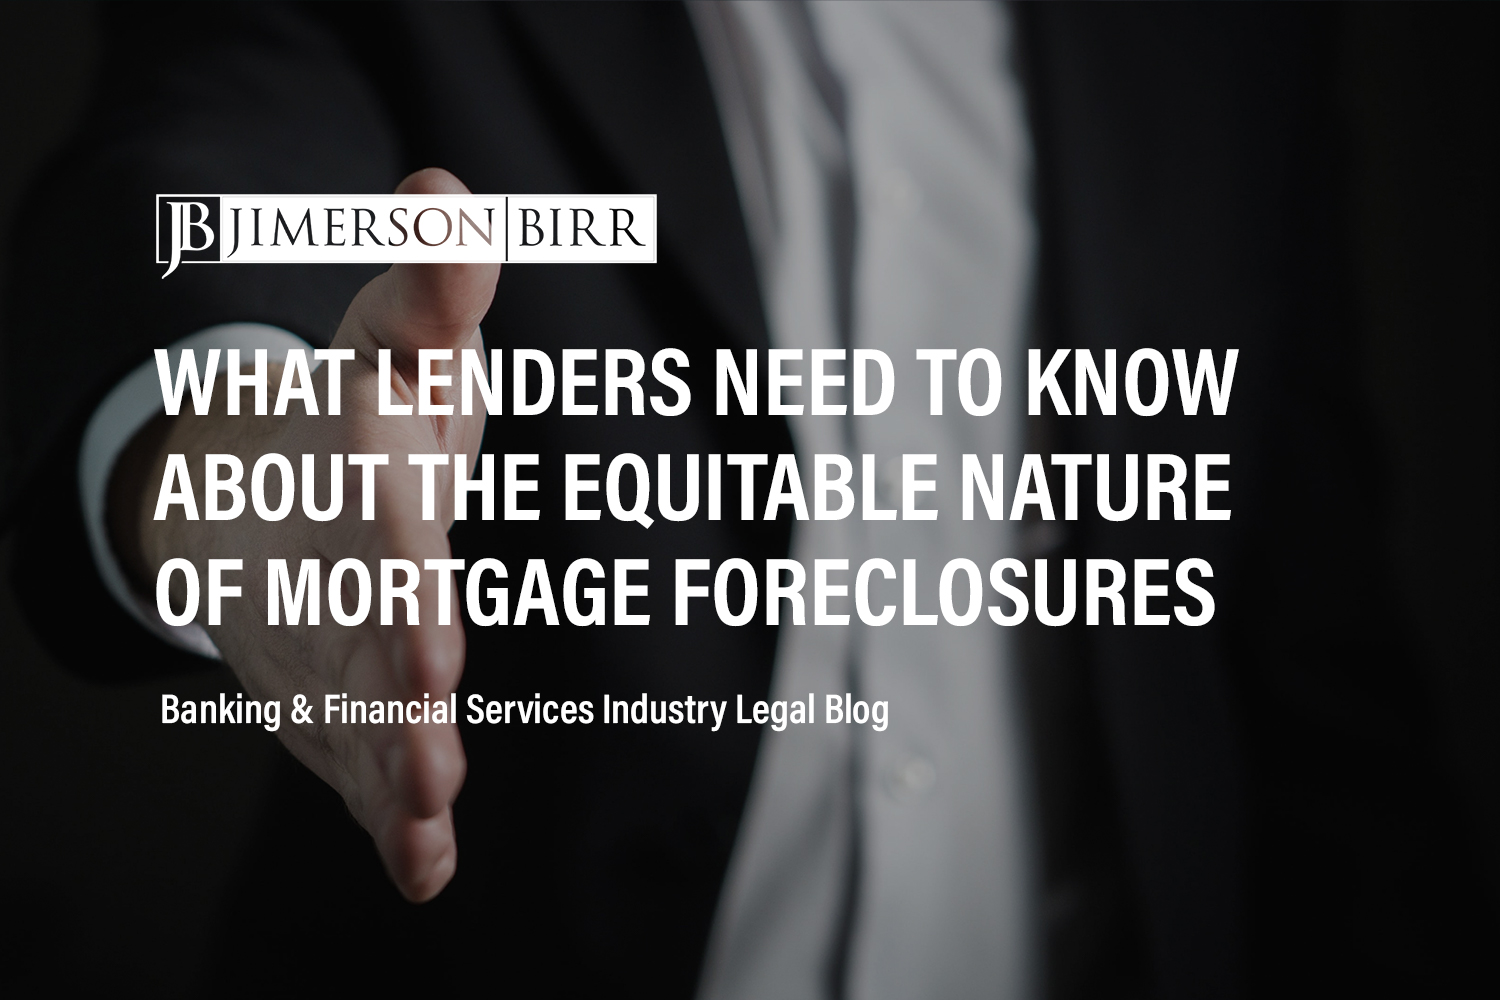 What Lenders Need to Know About the Equitable Nature of Mortgage Foreclosures